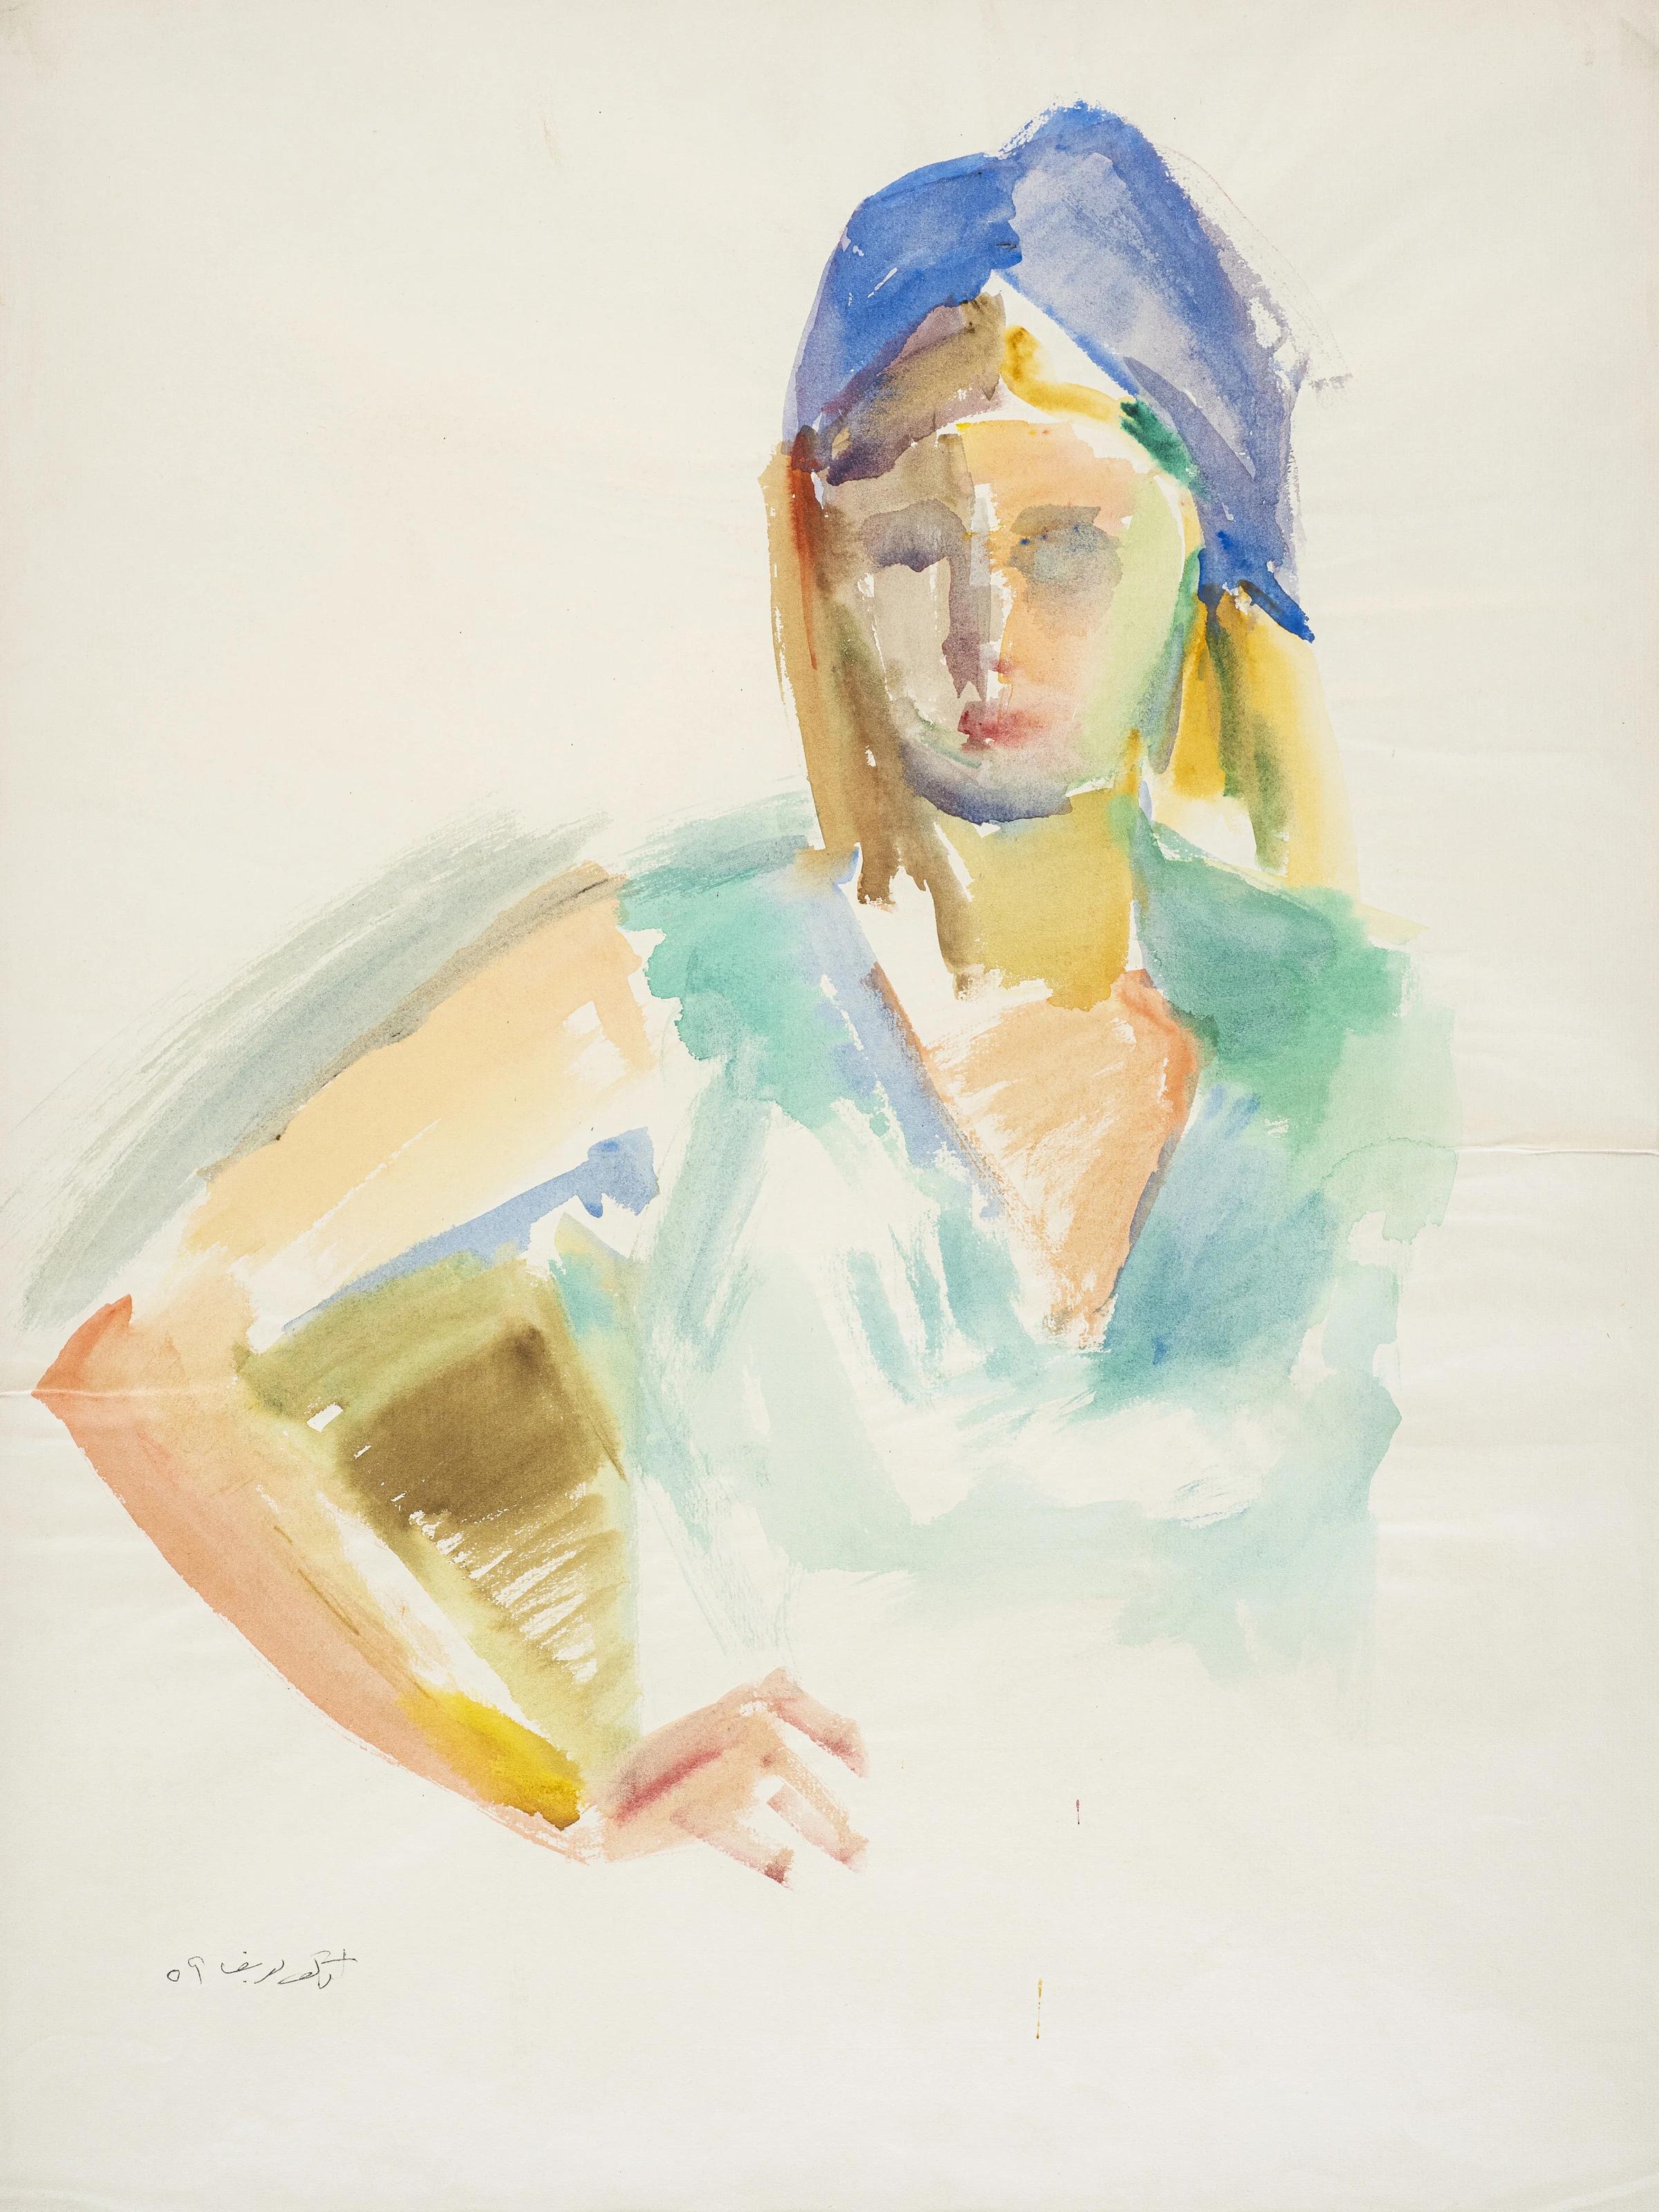 "Portrait of Woman II" Watercolor Painting 24" x 18" inch by Kawkab Youssef 

Signed and dated 1959

A short history of Kawkab Youssef El-Assal: 
With a steady hand, she inscribes this legend on the top of the first of two foolscap papers that